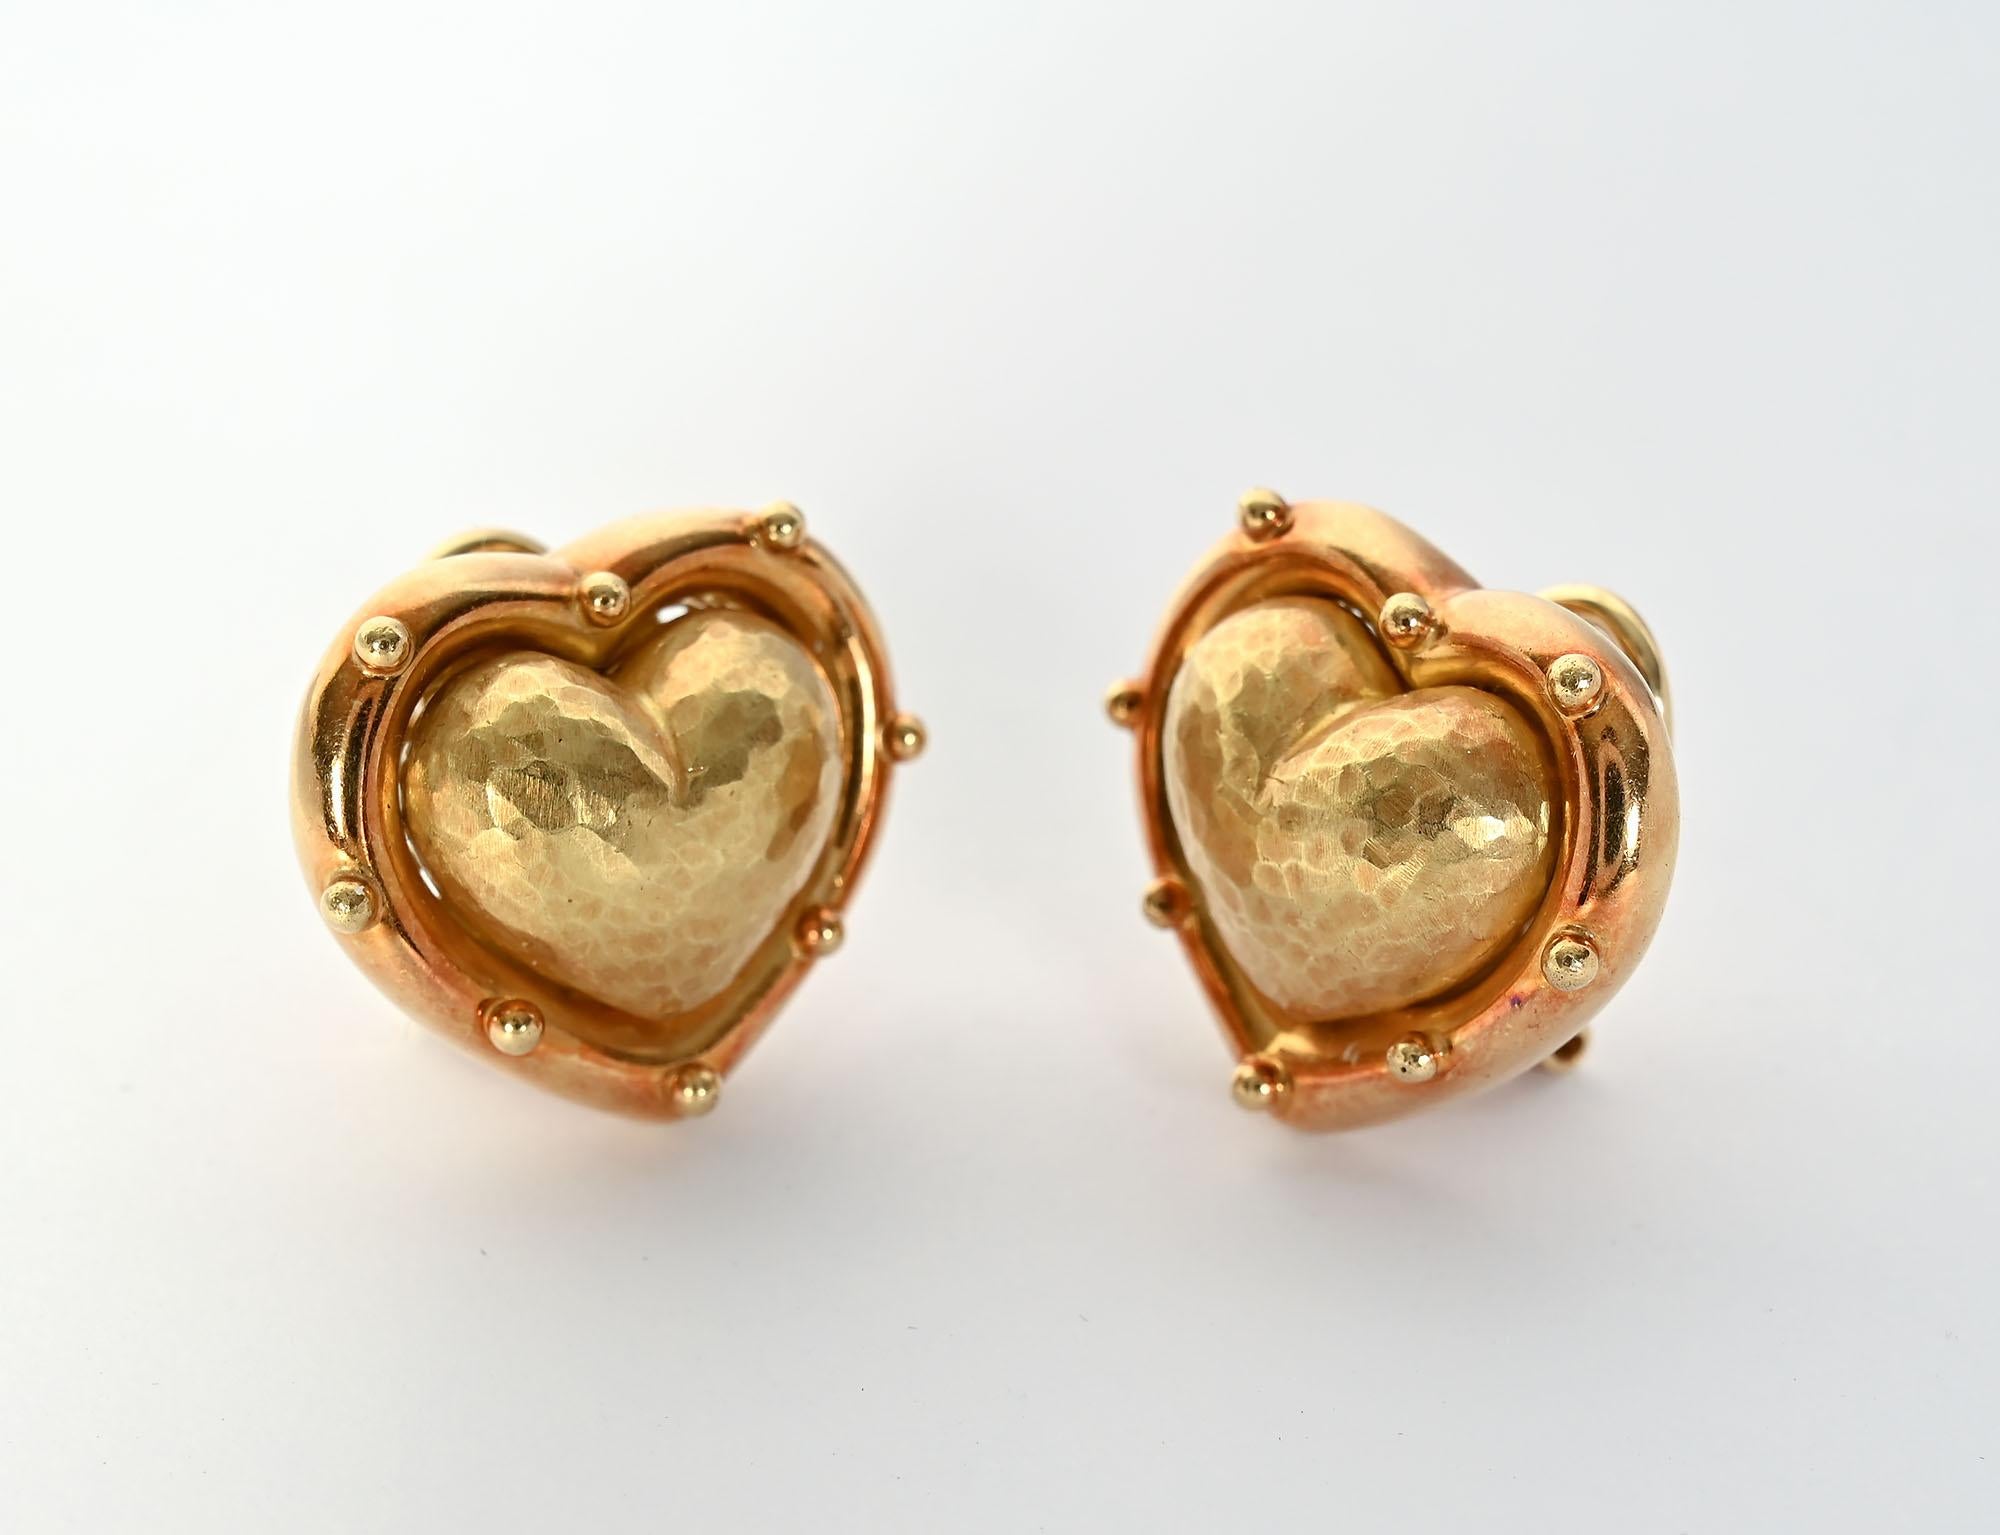 Wonderfully three dimensional Heart earrings by Paloma Picasso for Tiffany, The bulbous central part of the heart has a hammered finish surrounded by a smooth band with small  dots. The earrings are 18 karat gold with clip and post backs.